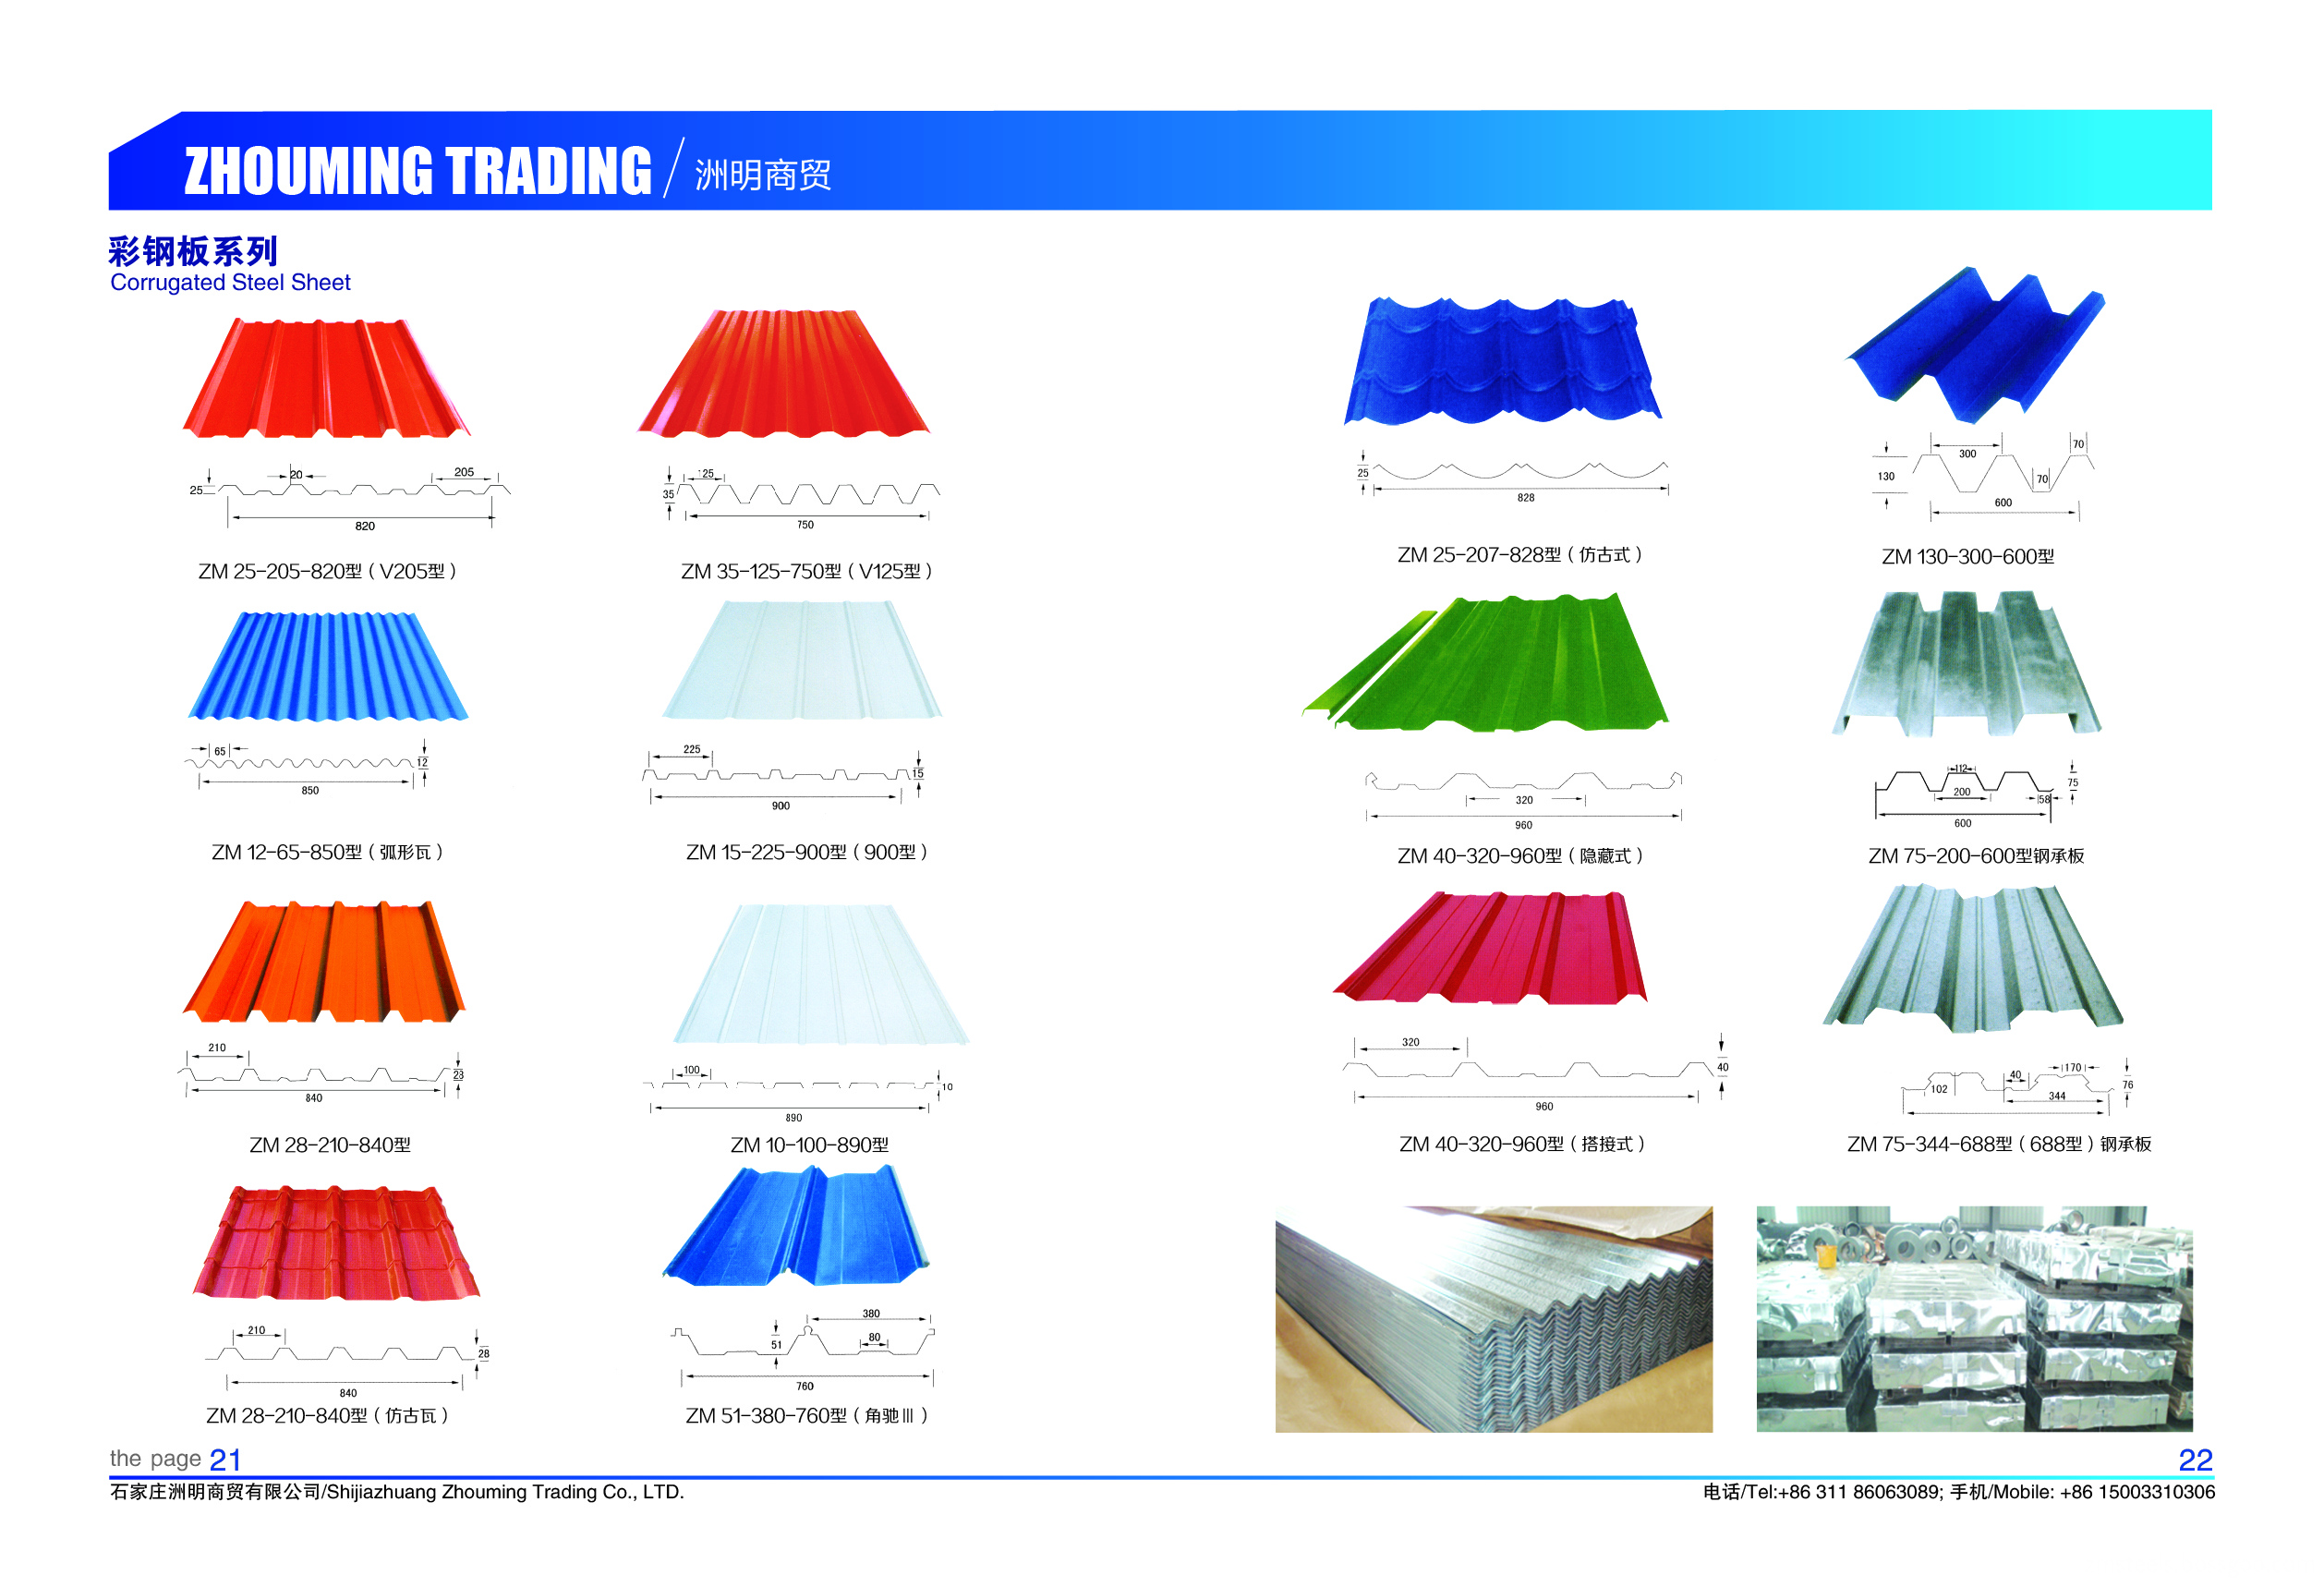 New Building Material 828 Glazed Steel Roof Sheet